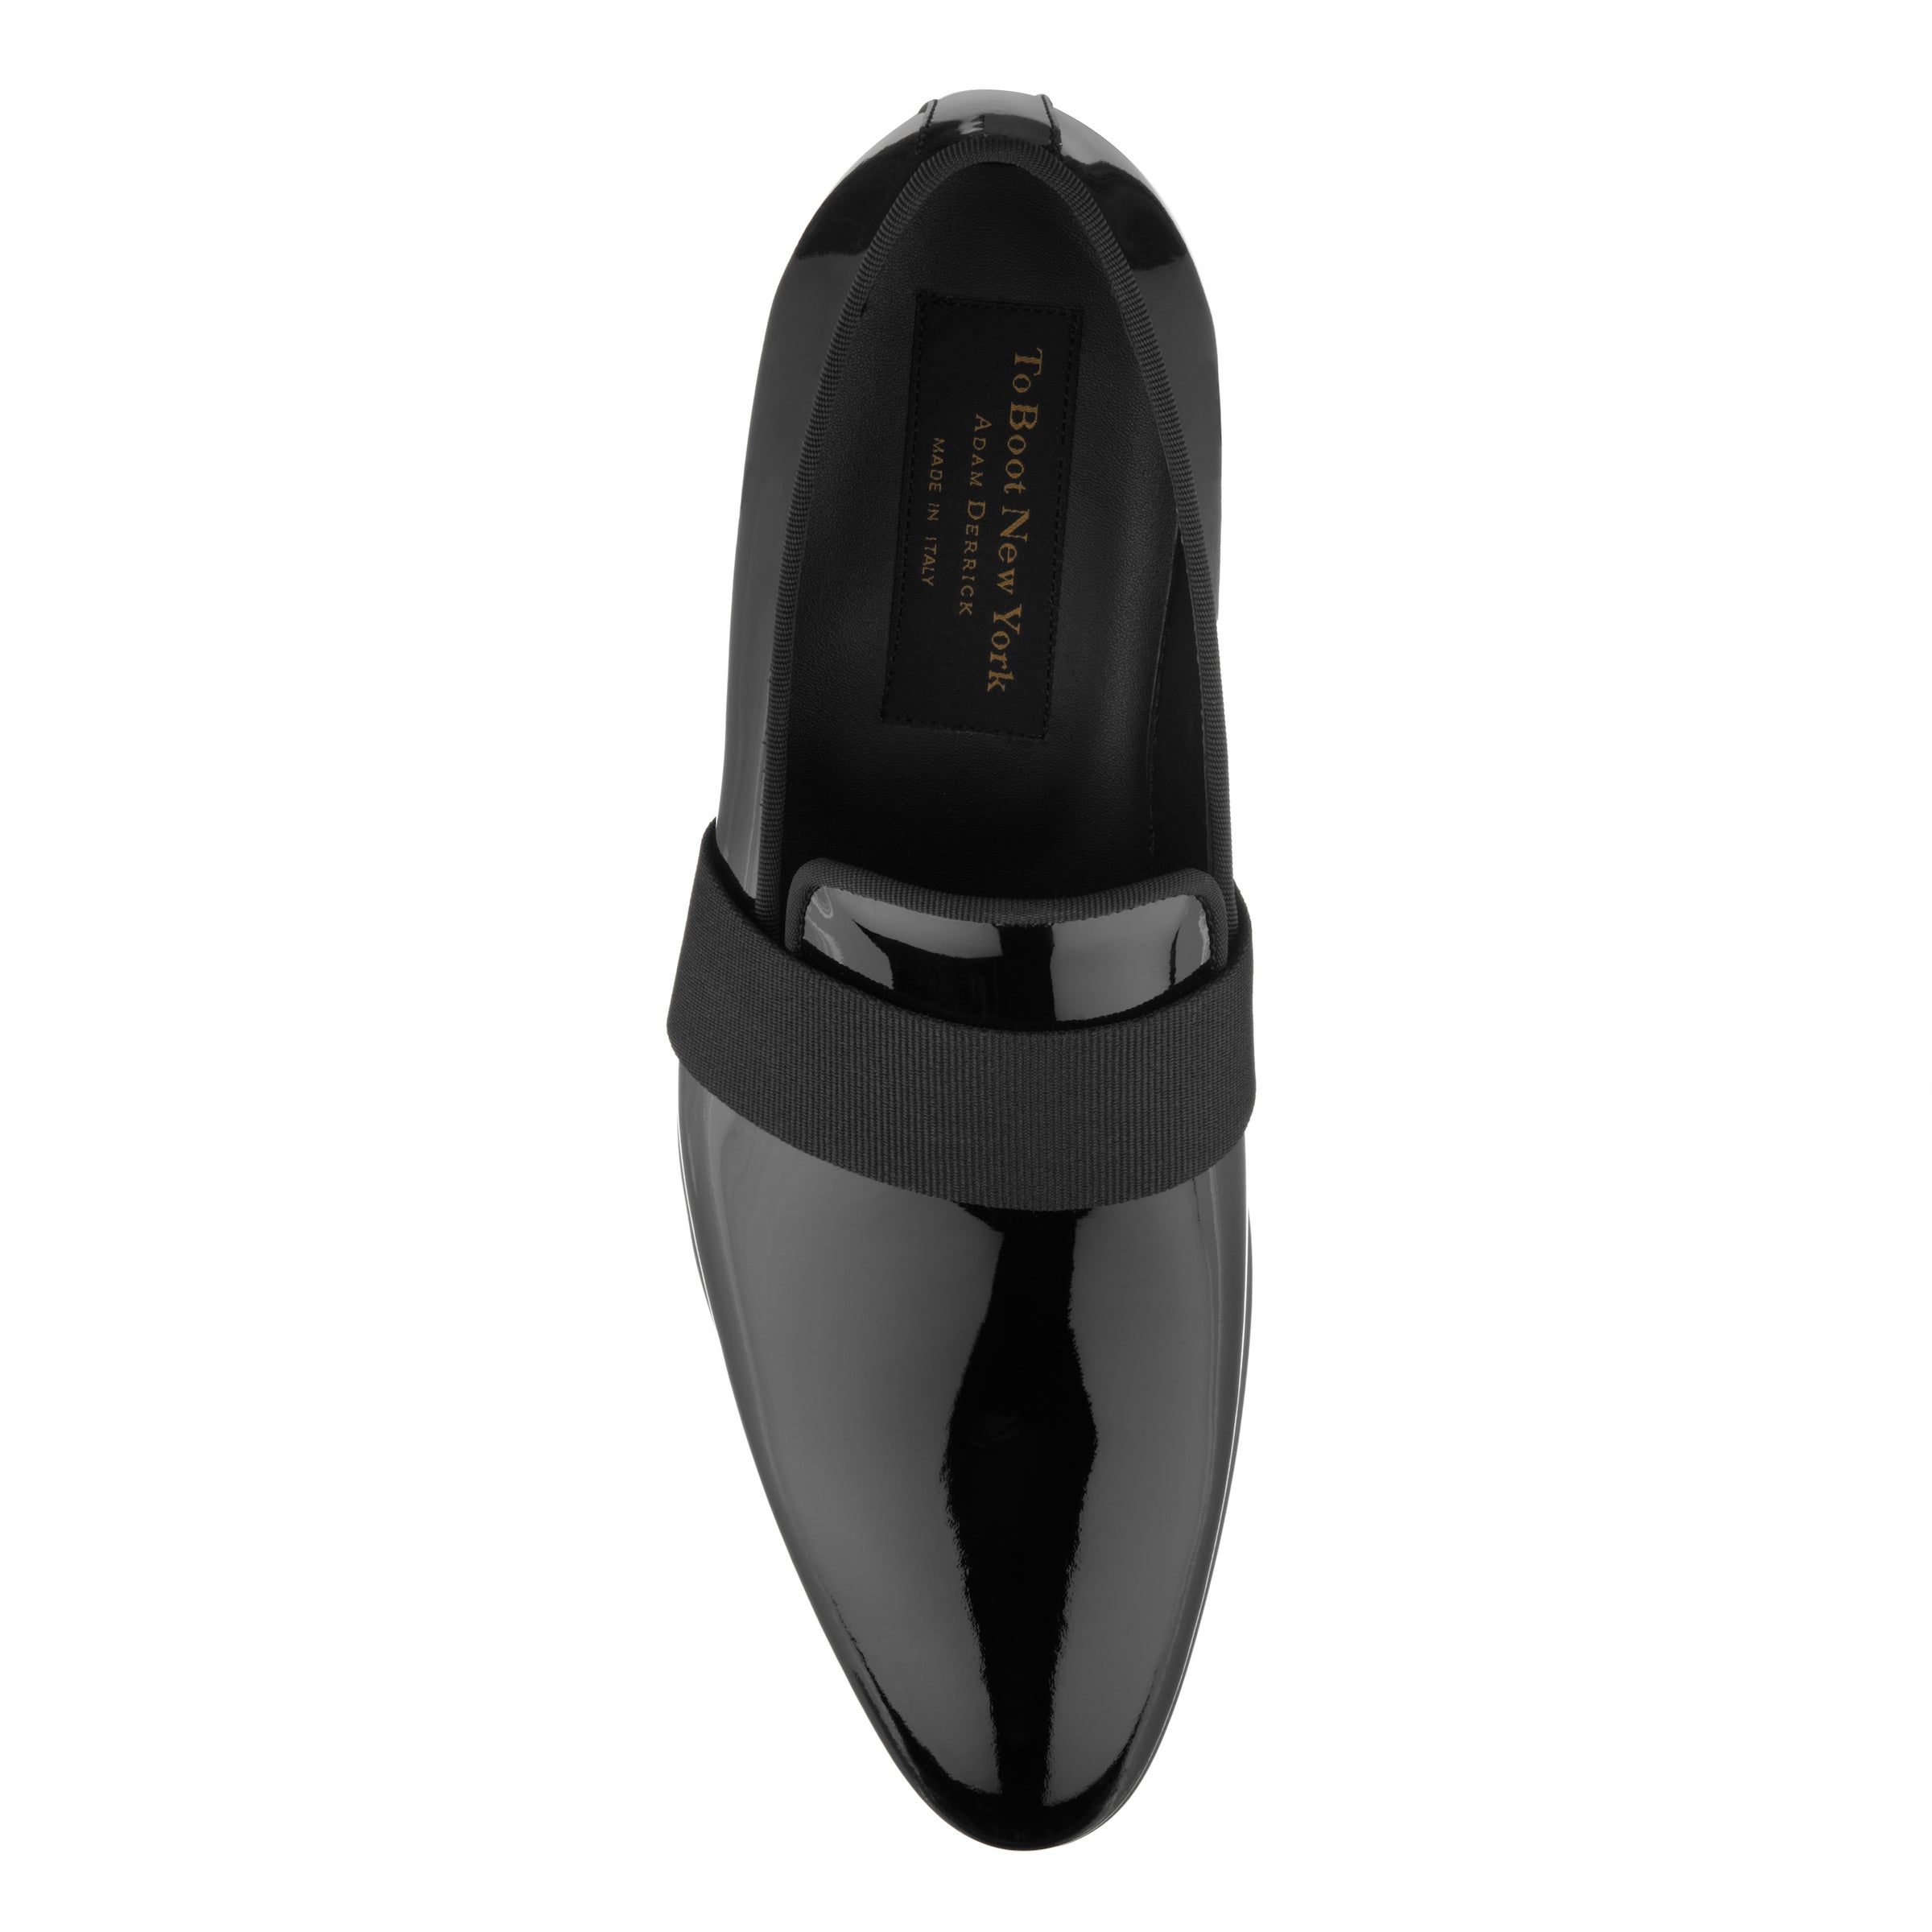 Perry Black Patent Formal Shoe